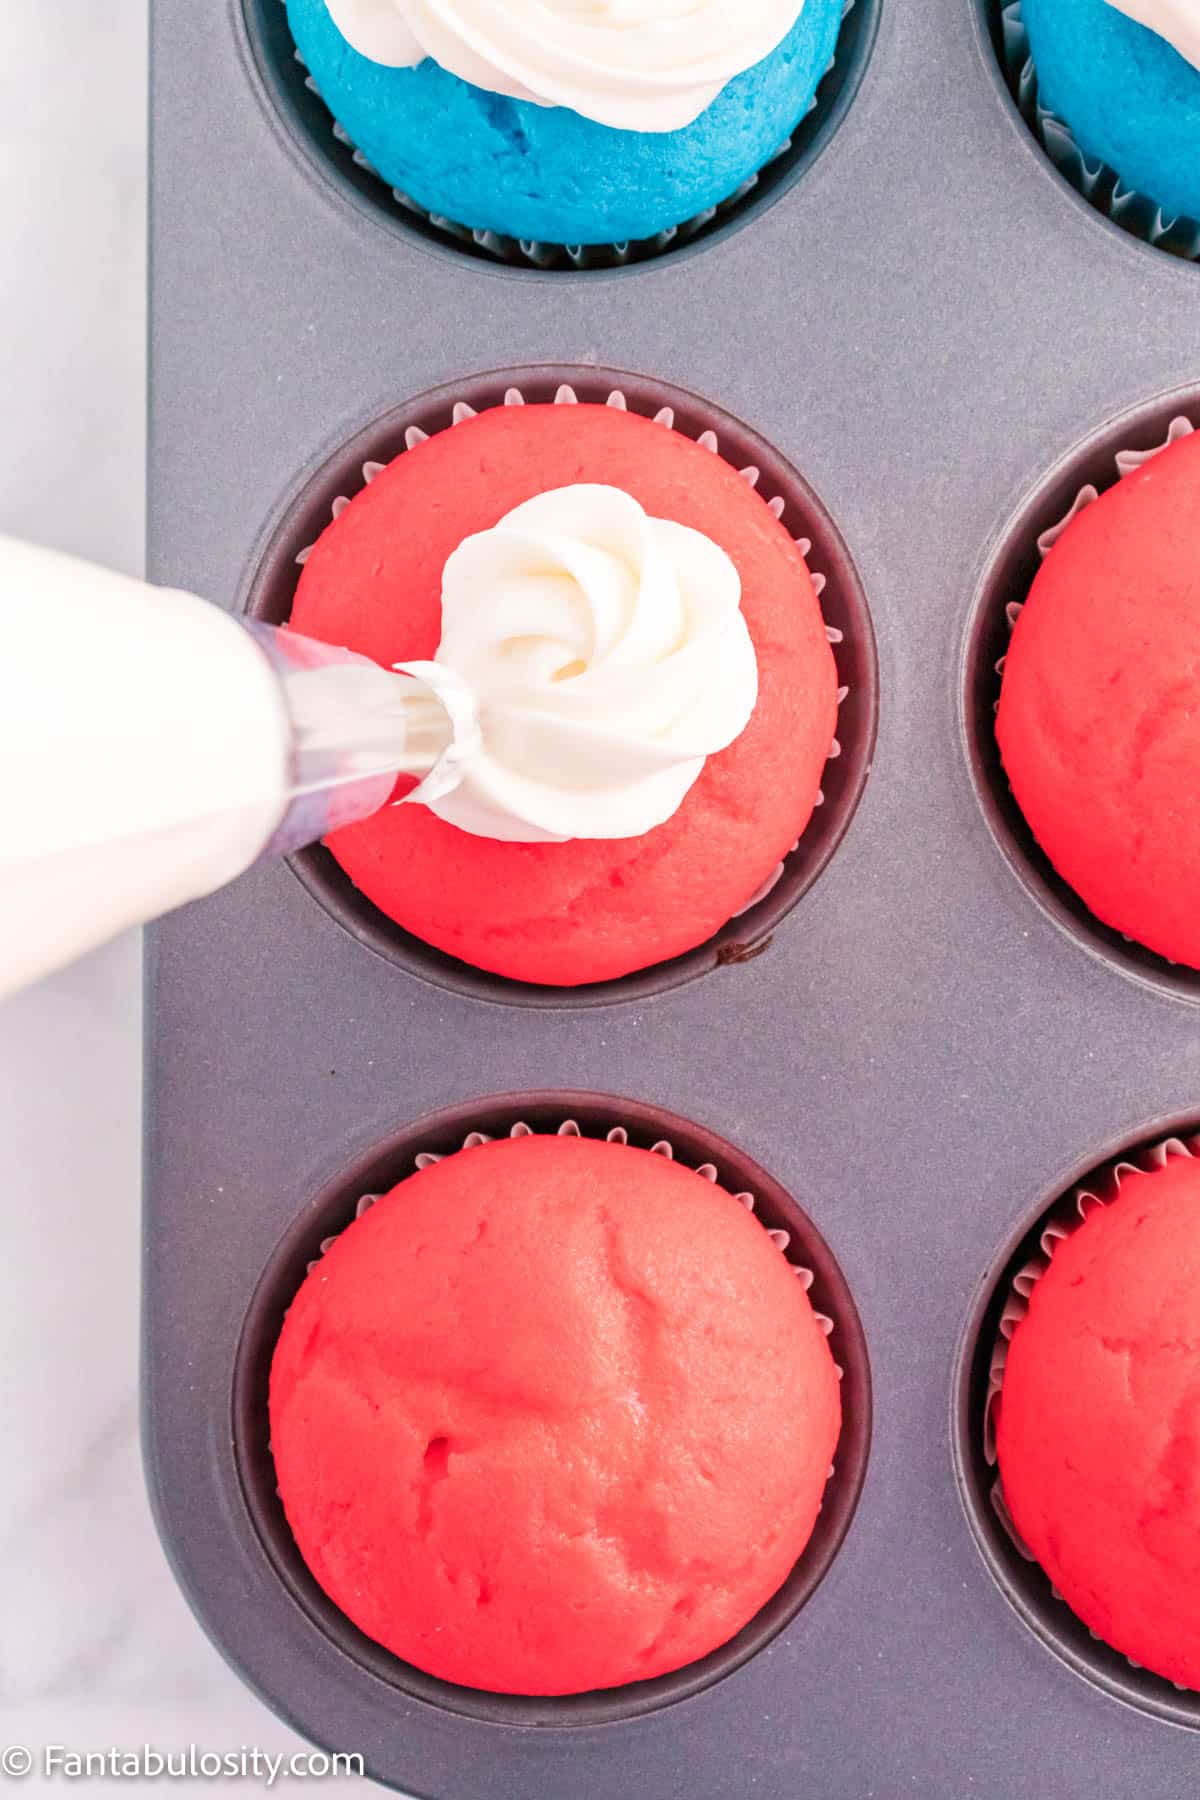 Frosting being piped on a red cupcake.